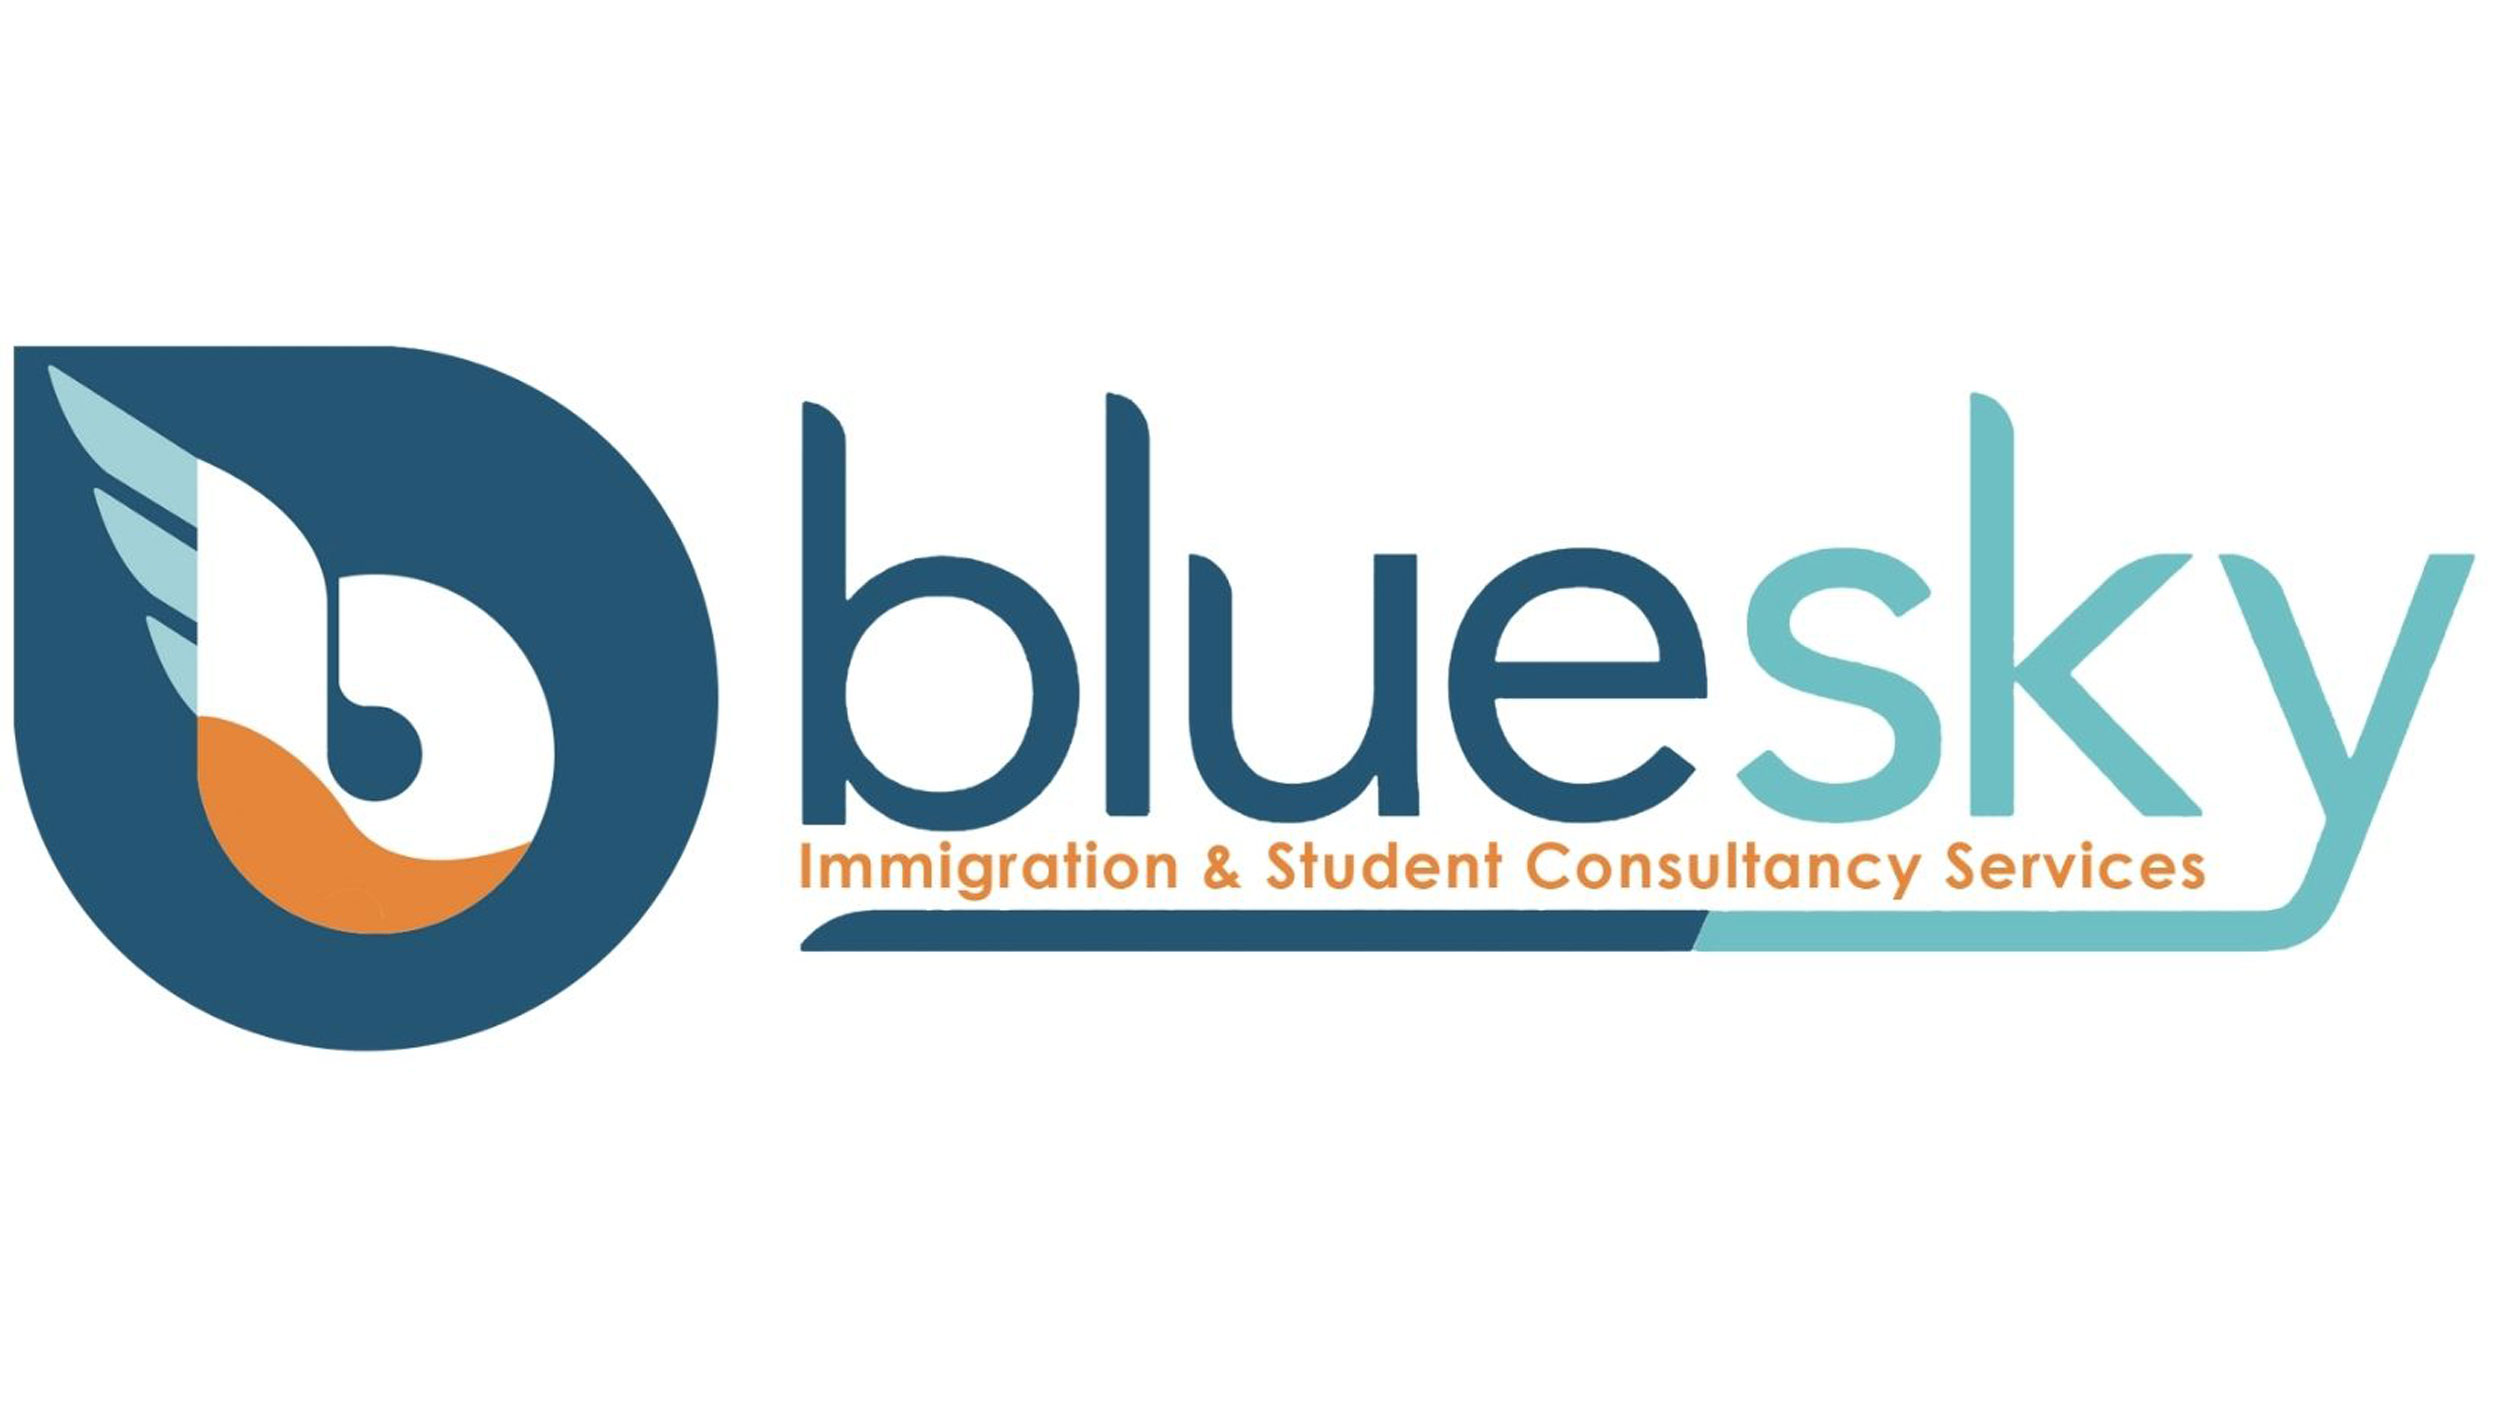 Immigration Consultants Projects :: Photos, videos, logos, illustrations  and branding :: Behance